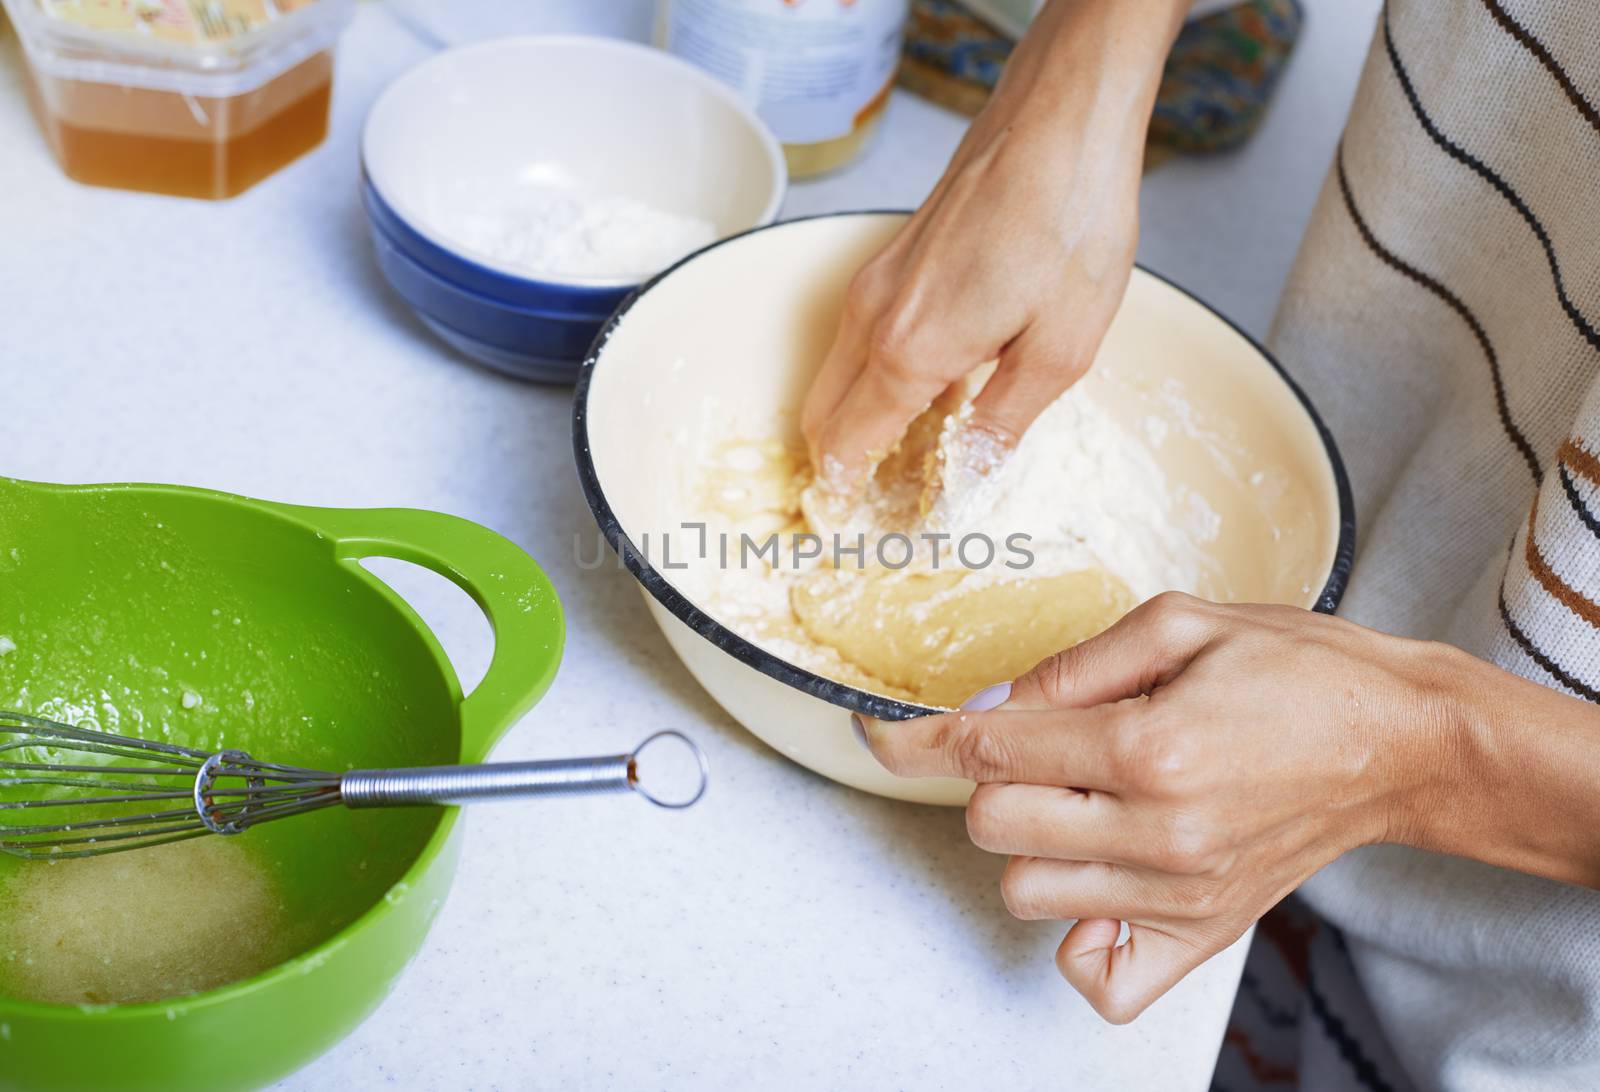 Hands of the woman preparing pie pastry